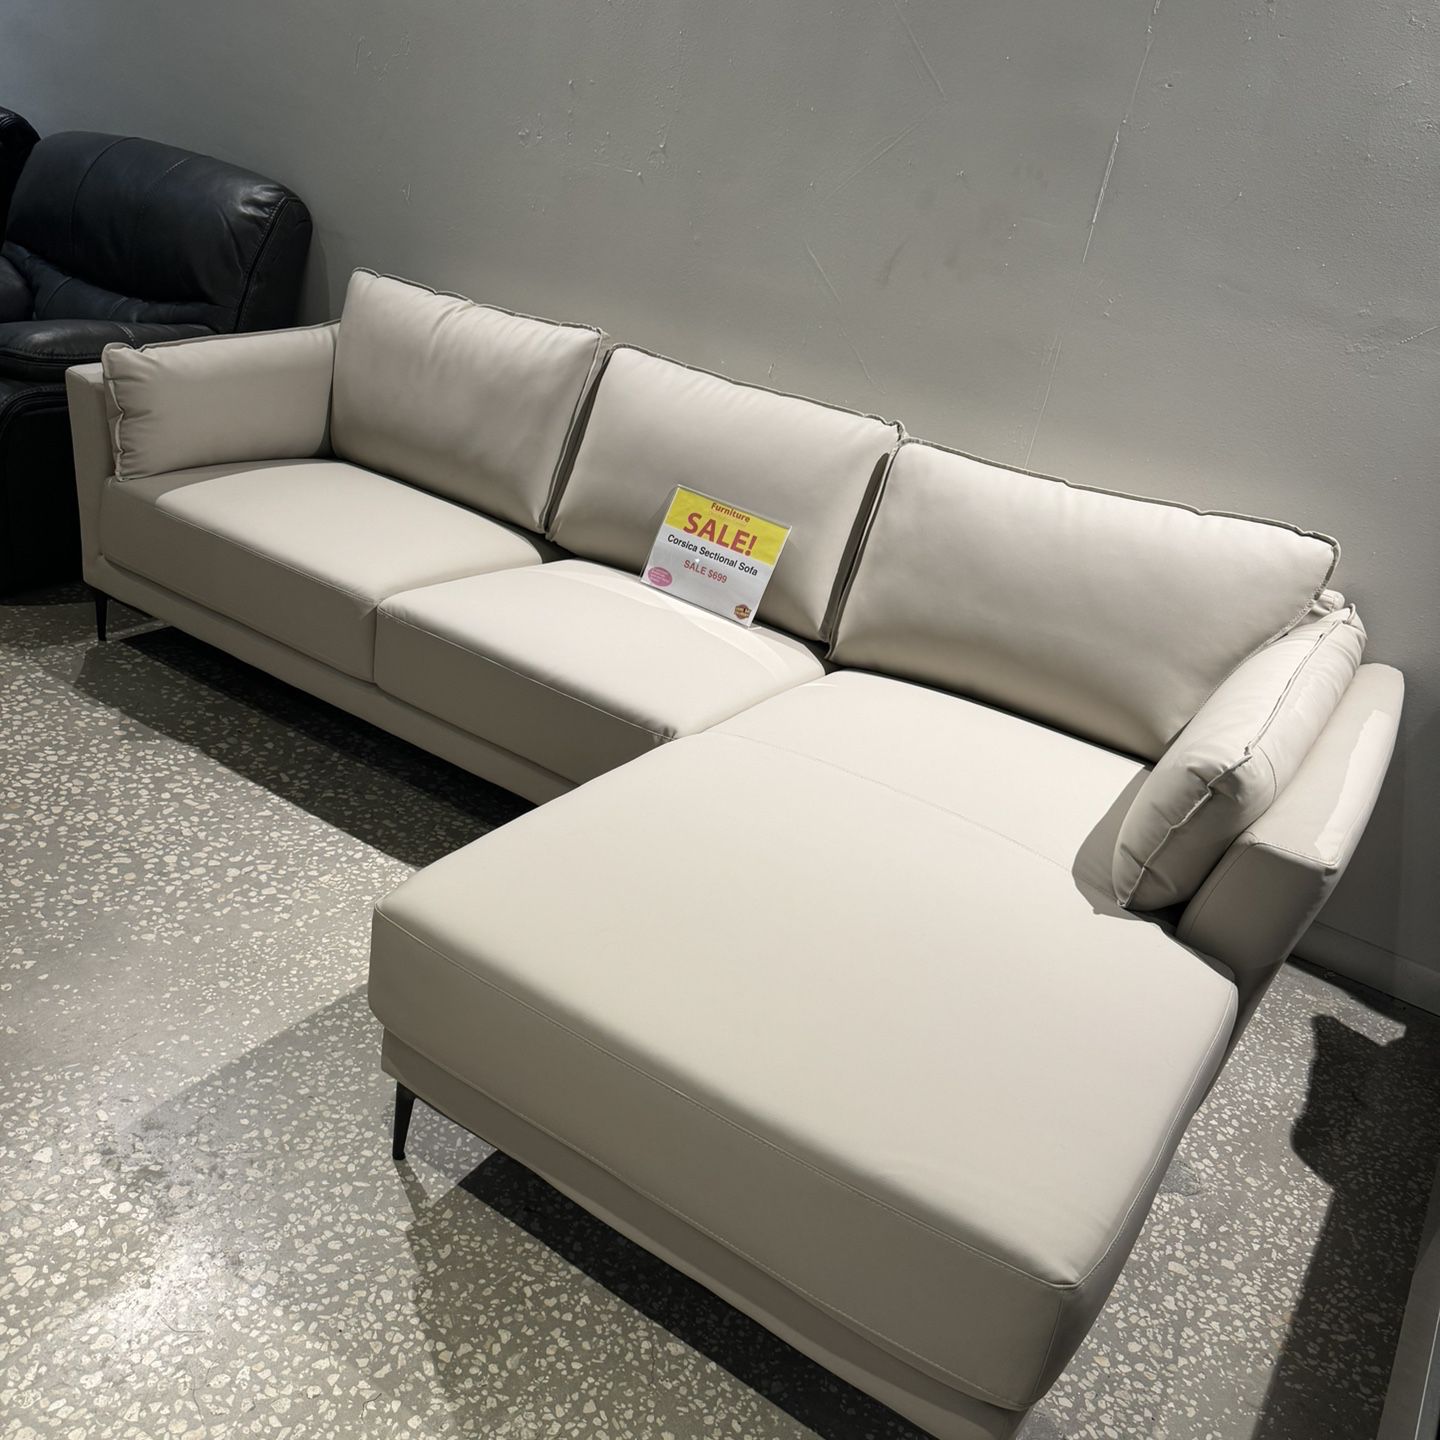 BEAUTIFUL CORSICA BEIGE SECTIONAL SOFA!$699 LIMITED TIME!*SAME DAY DELIVERY*NO CREDIT NEEDED*EASY FINANCING*